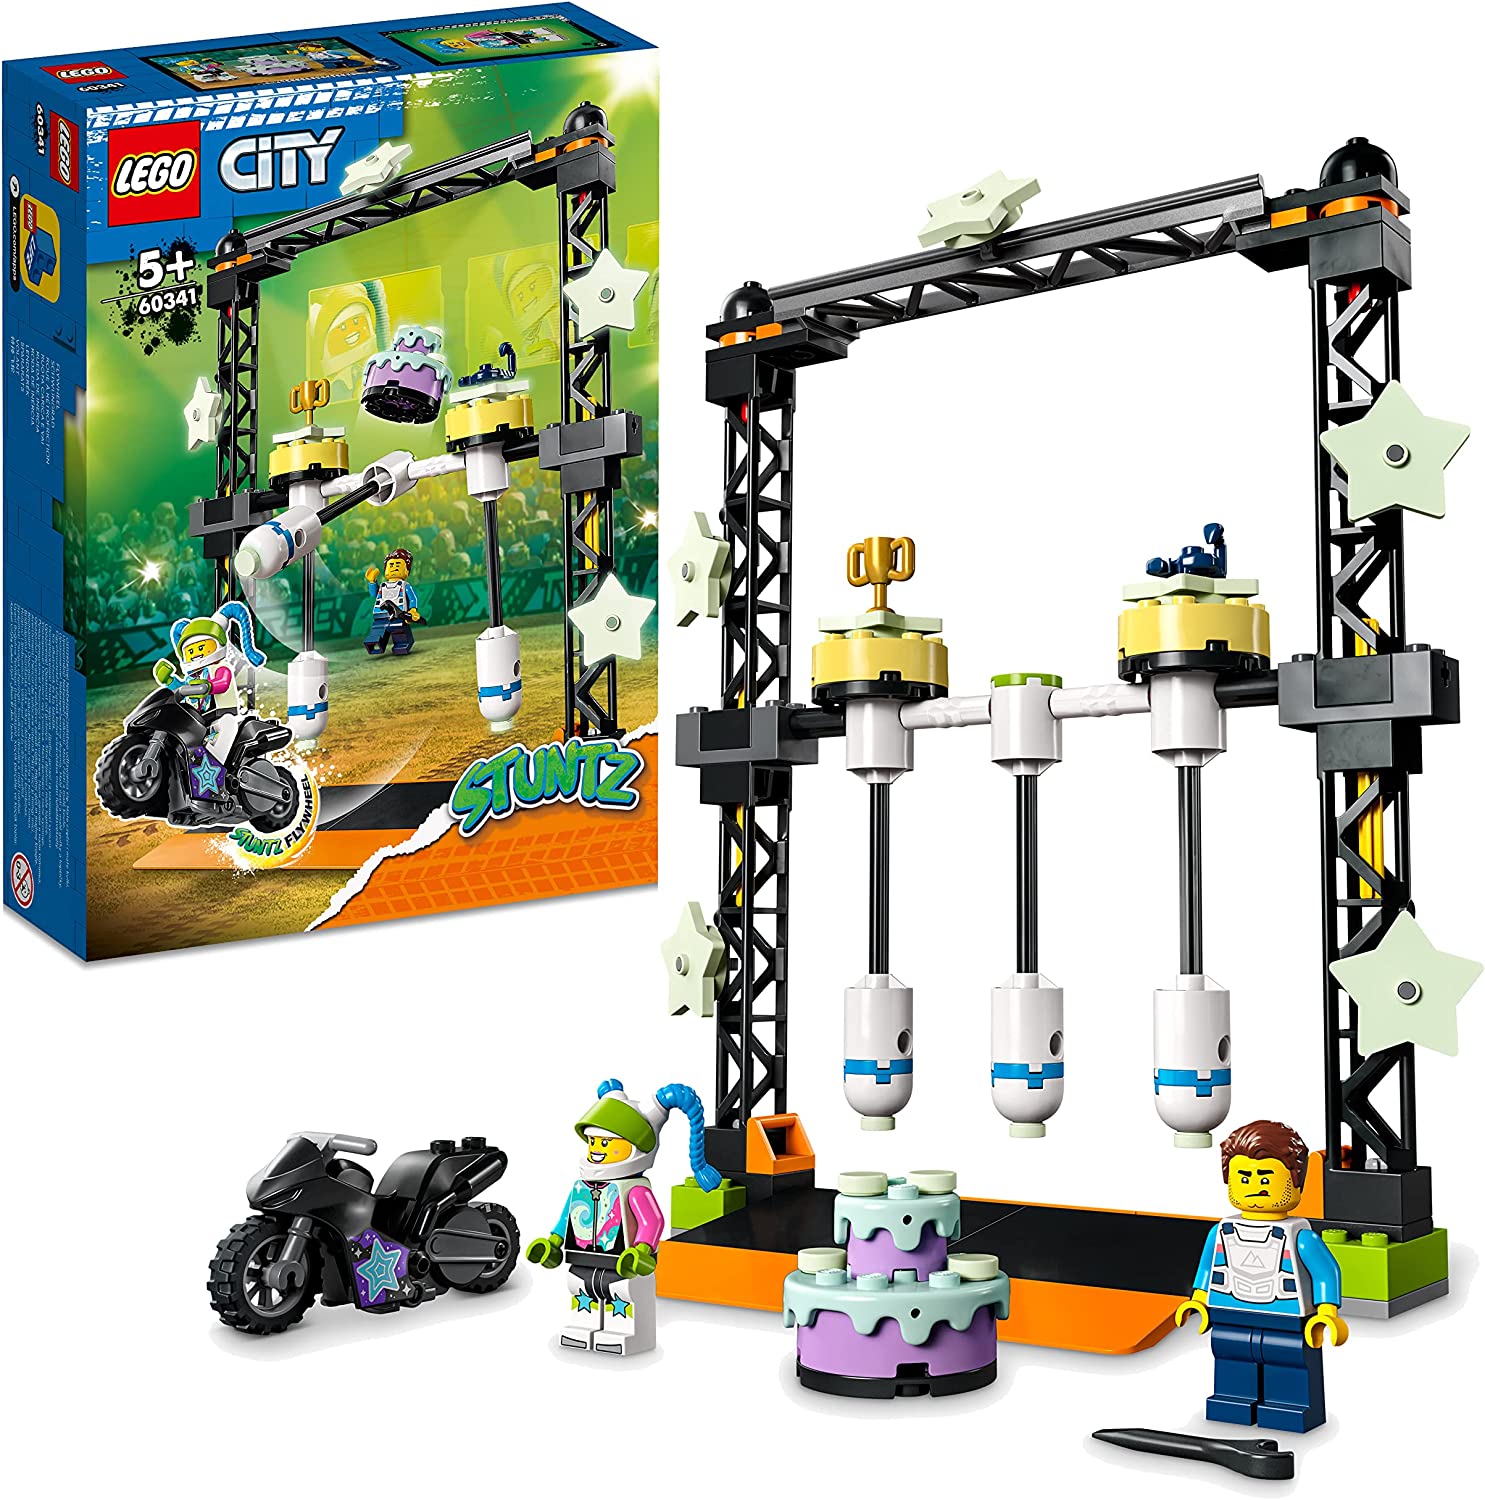 LEGO 60341 City Stuntz Overturn Challenge Set Including Motorcycle and Stunt Racer Mini Figure Action Toy for Children from 5 Years